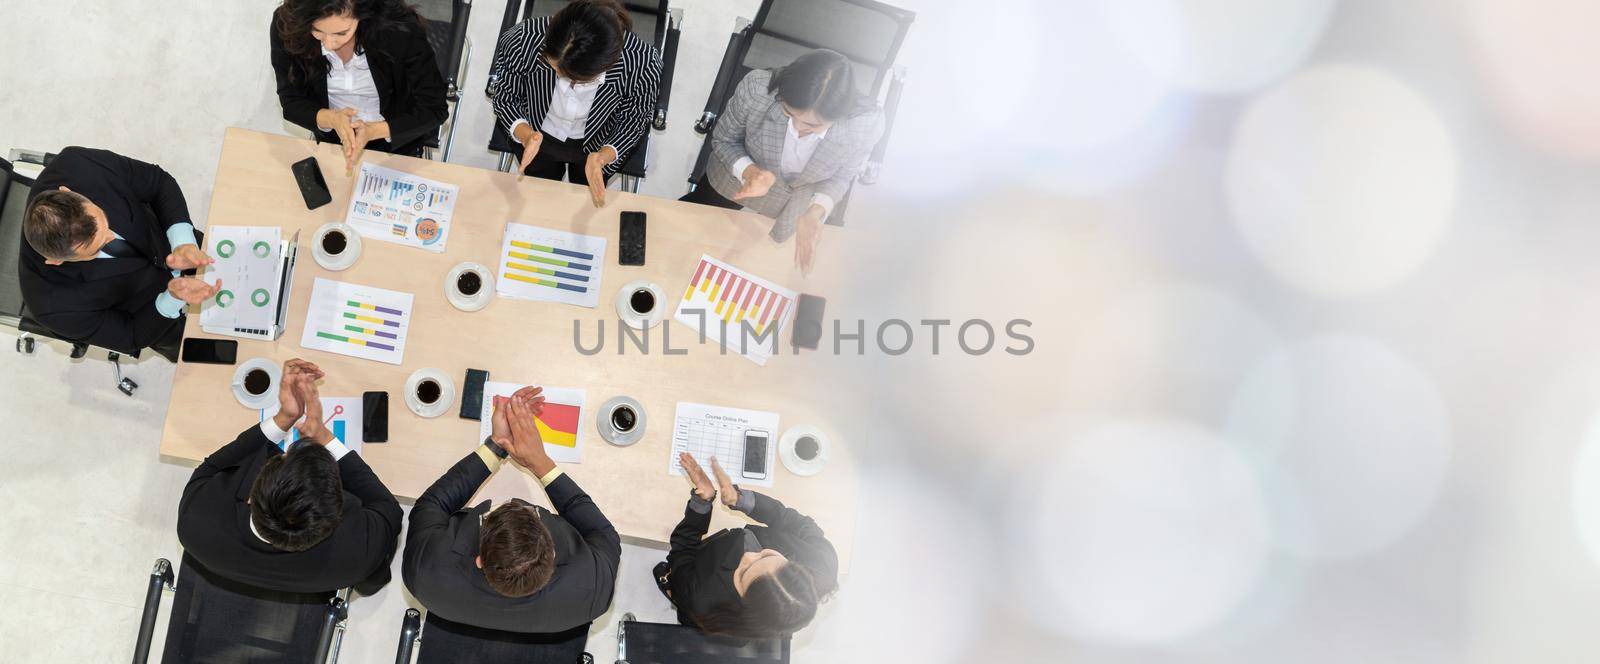 Successful business people celebrate together with joy at office table shot from top view . Young businessman and businesswoman workers express cheerful victory showing teamwork in broaden view .